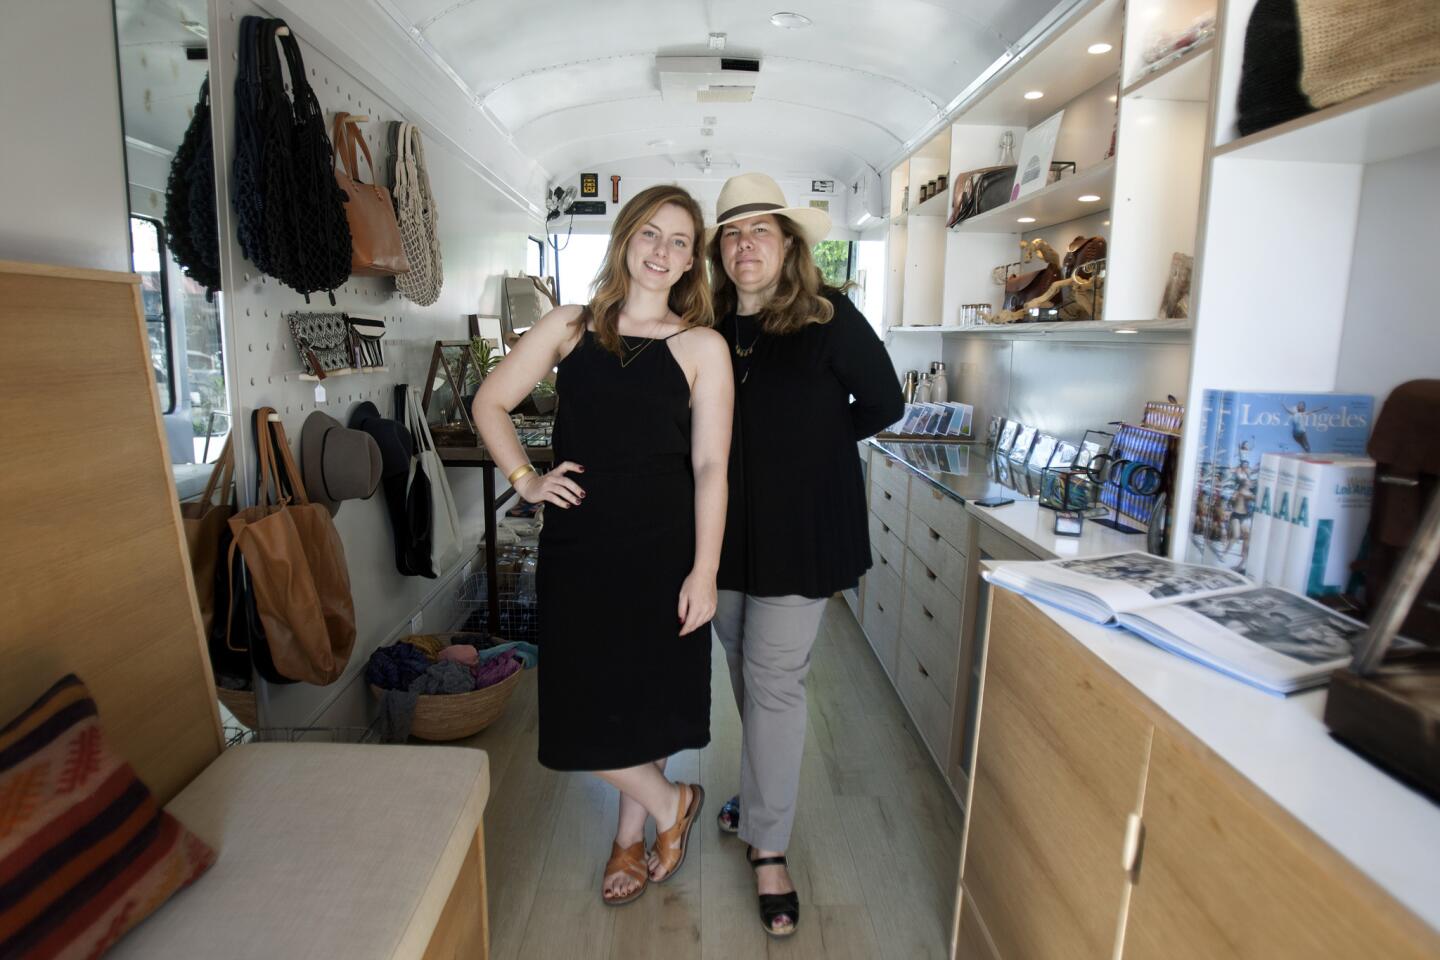 Susan Forrest-Reynolds, right, and her daughter, Lucia Reynolds, are co-owners of the mobile retail boutique.